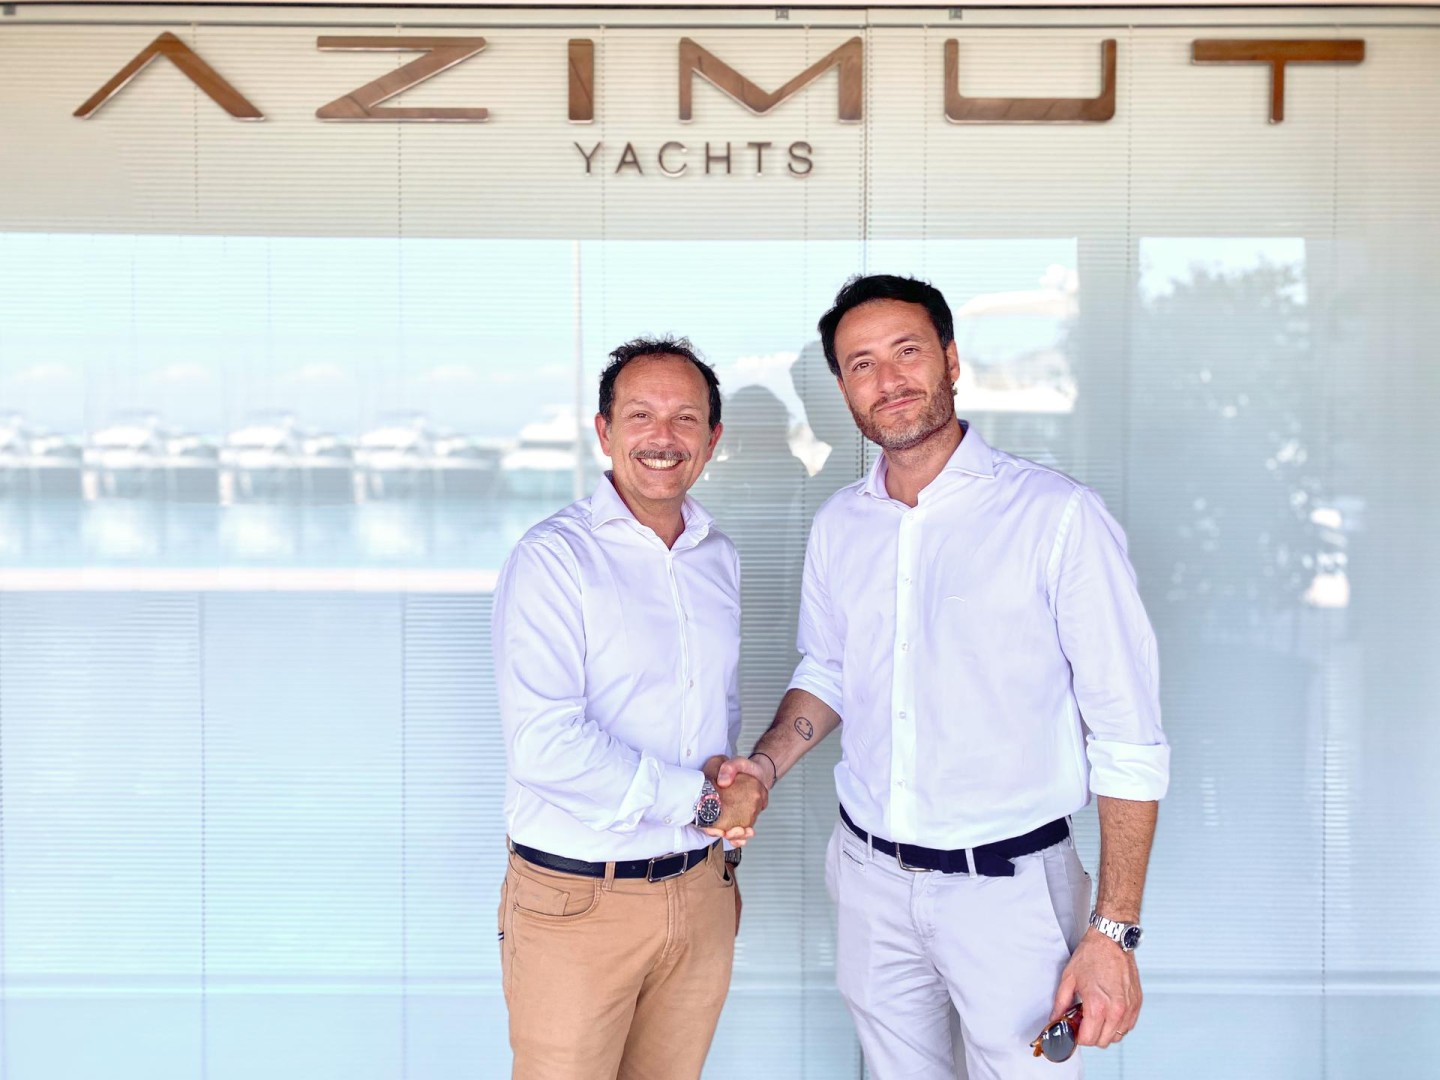 Azimut is proud to announce its new partnership with RCMarine